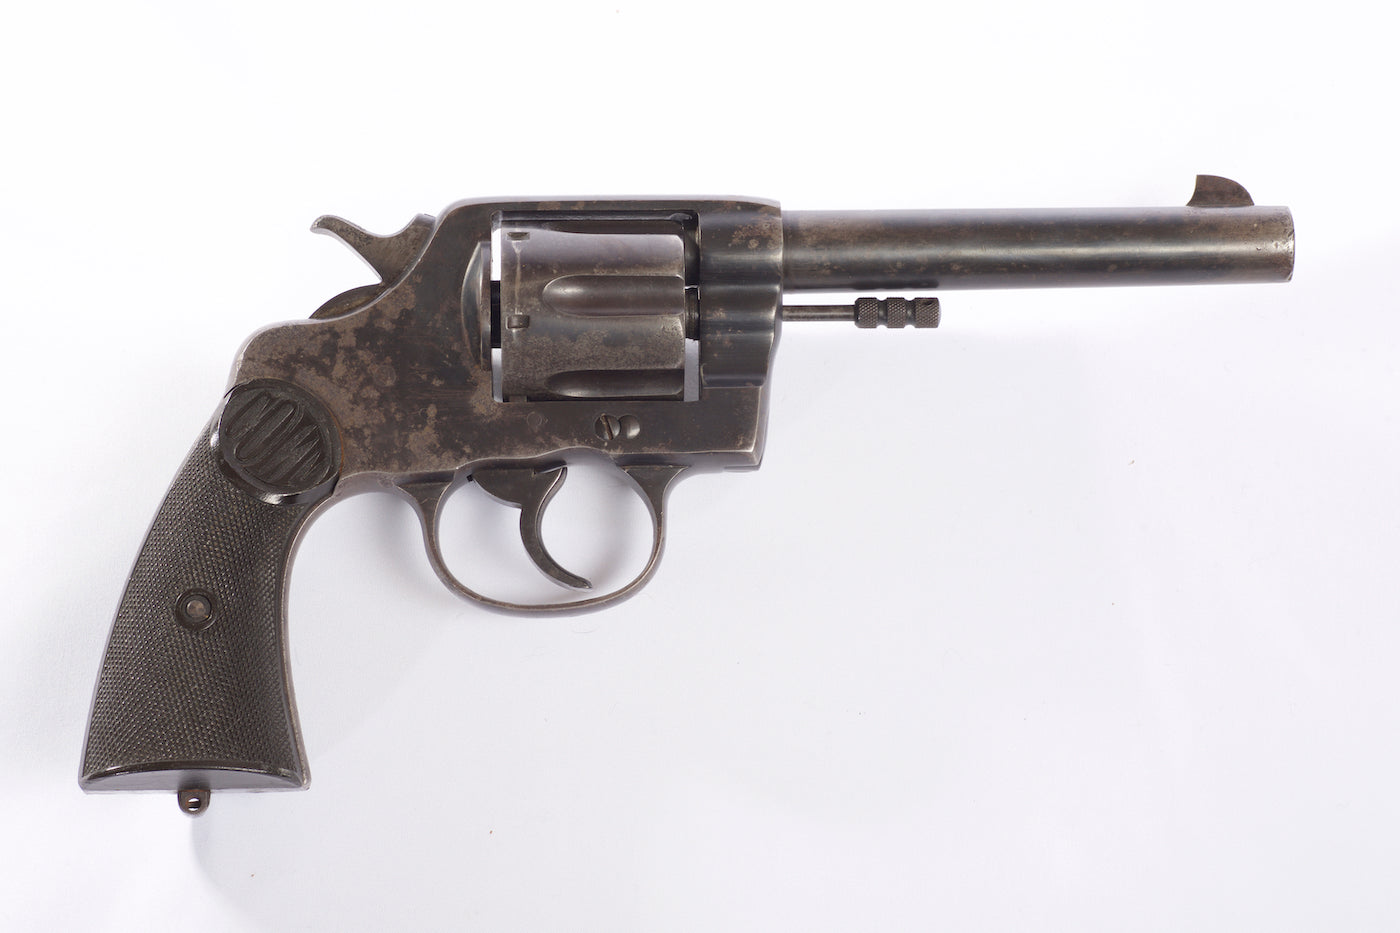 Early Colt "New Service" 38-40 revolver - 1905